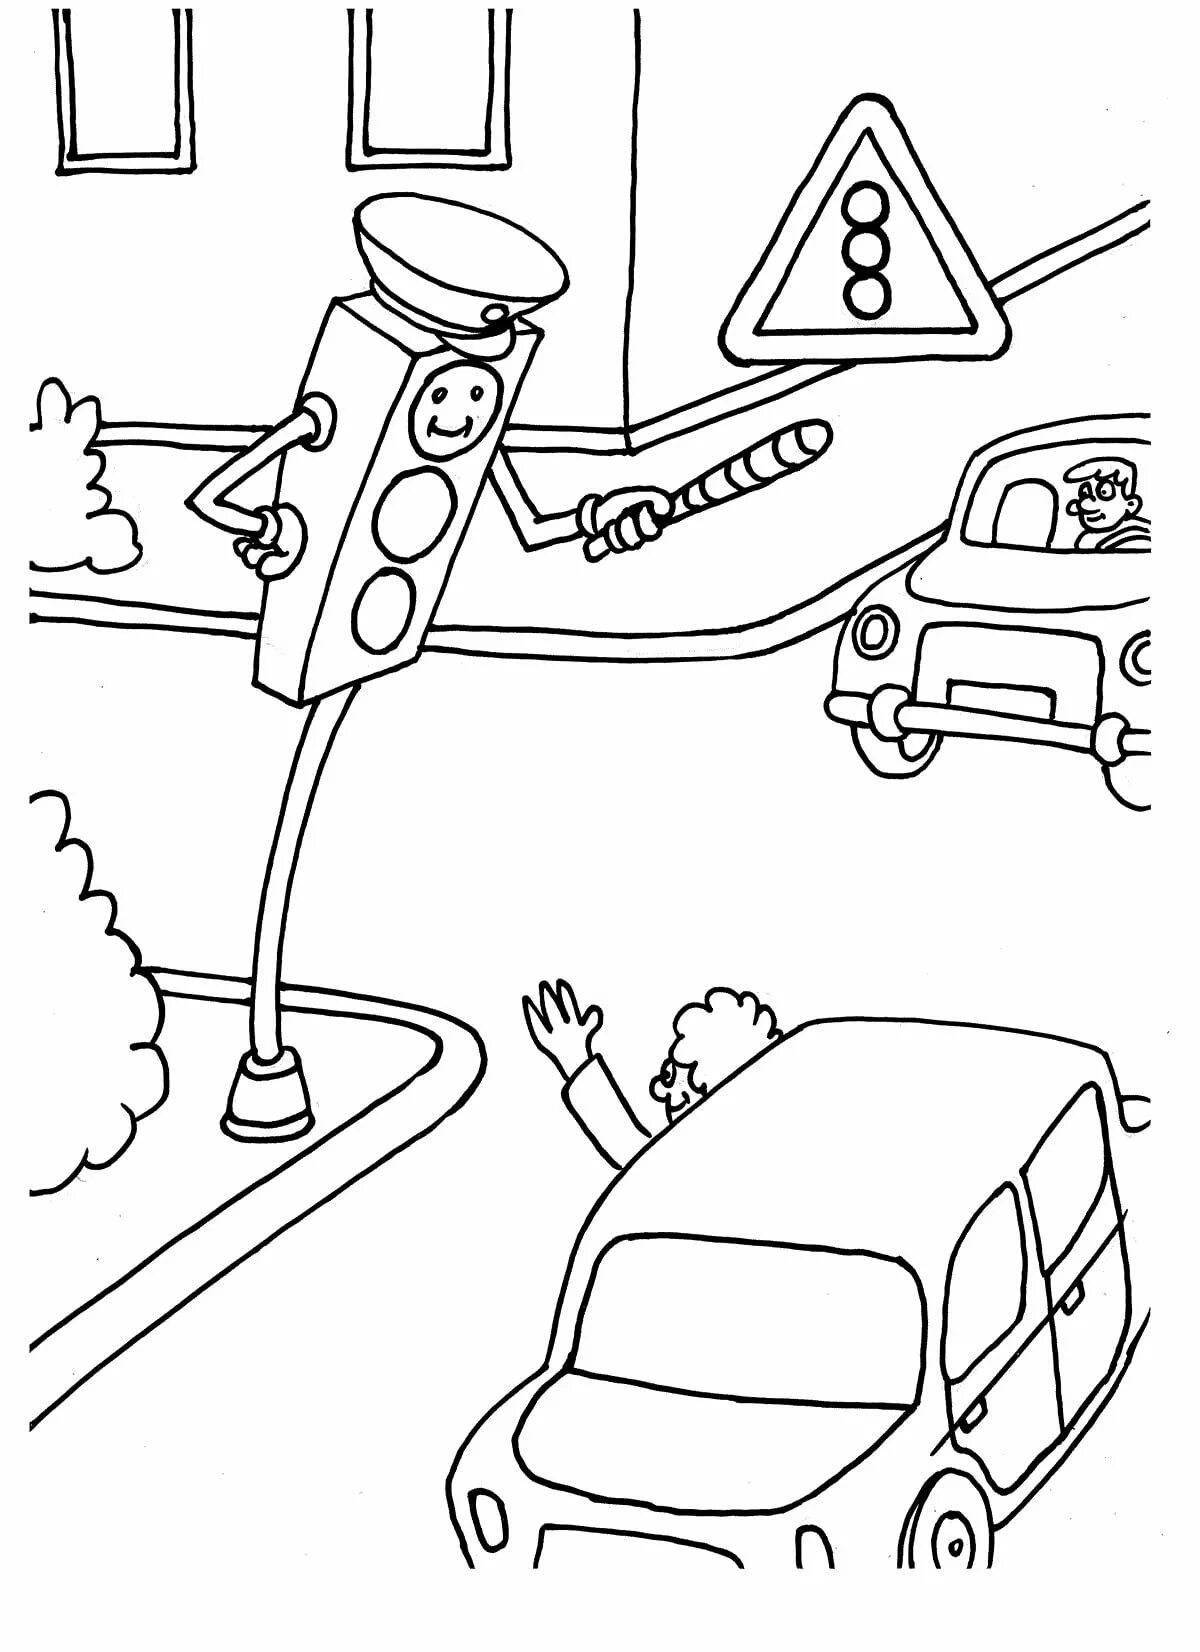 Funny traffic light coloring page